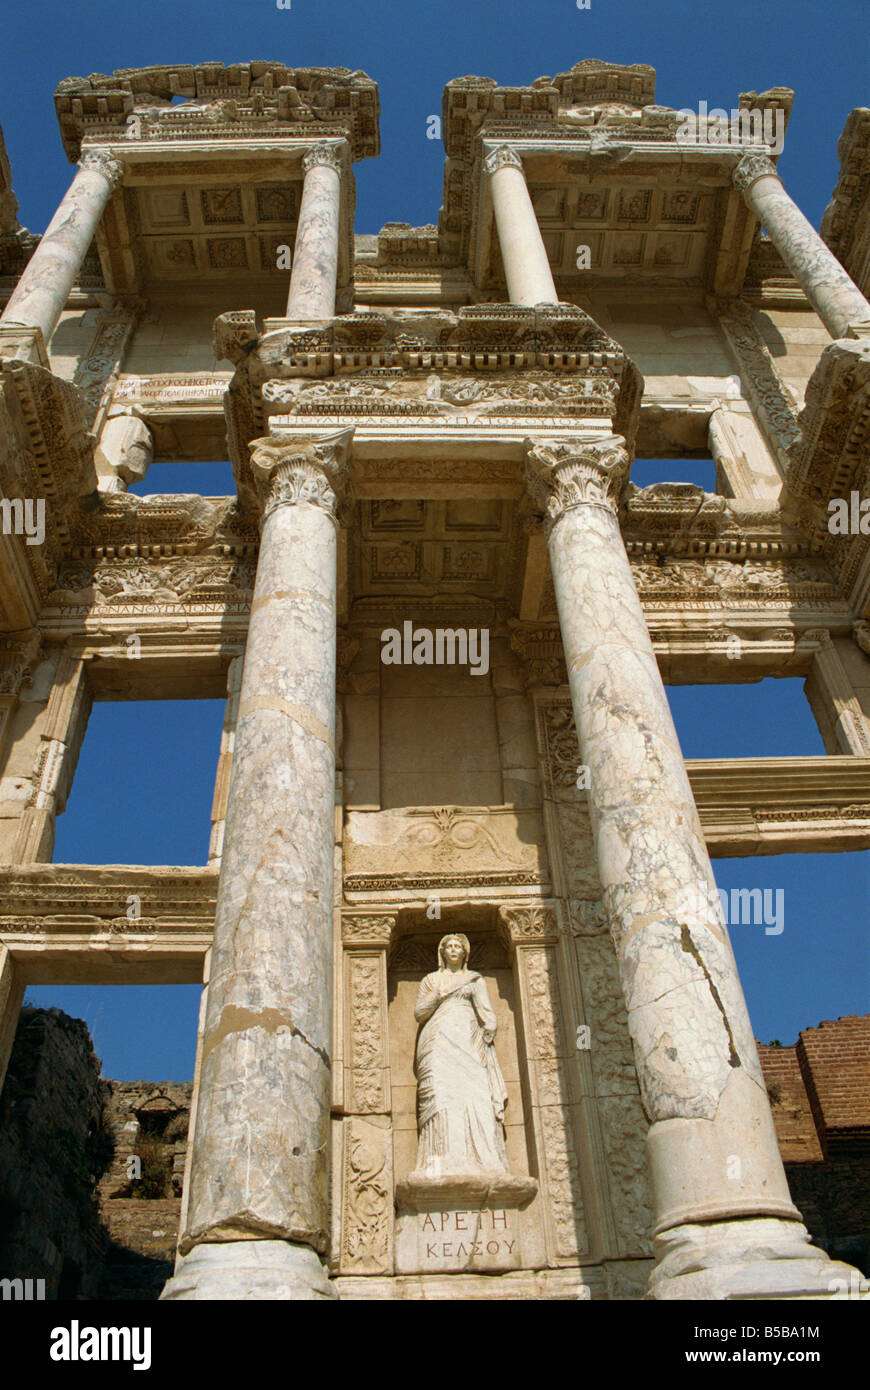 the celsus library in ephesus dating from 135 ad